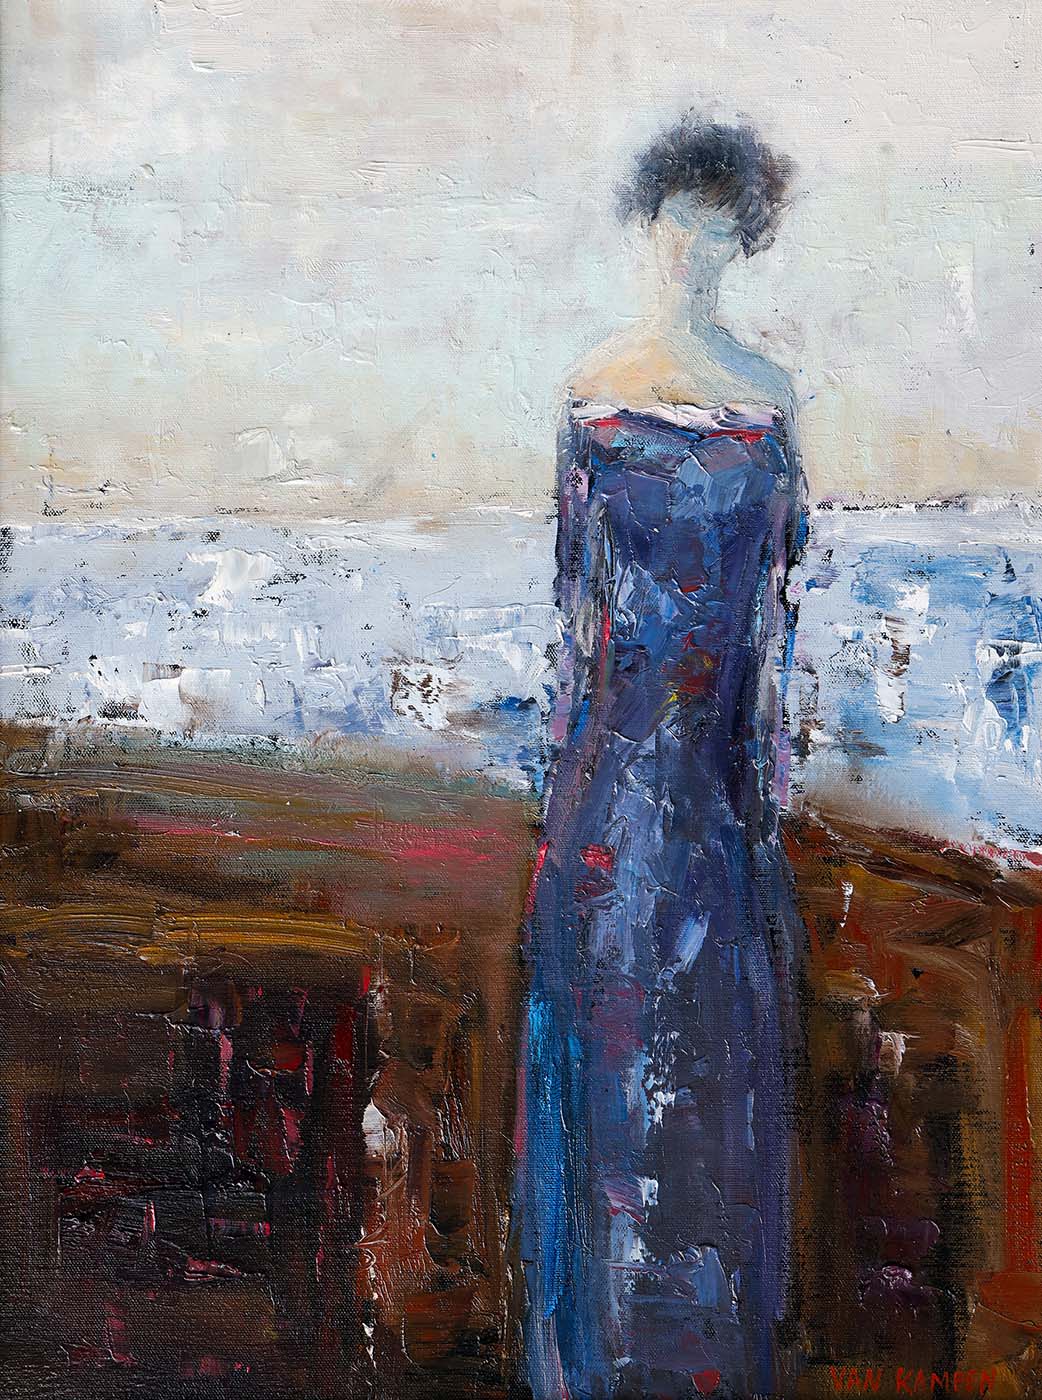 Contemporary art. Title: Serenity by the Sea, Oil on Canvas, 24x18 in by Canadian artist Katherine van Kampen.